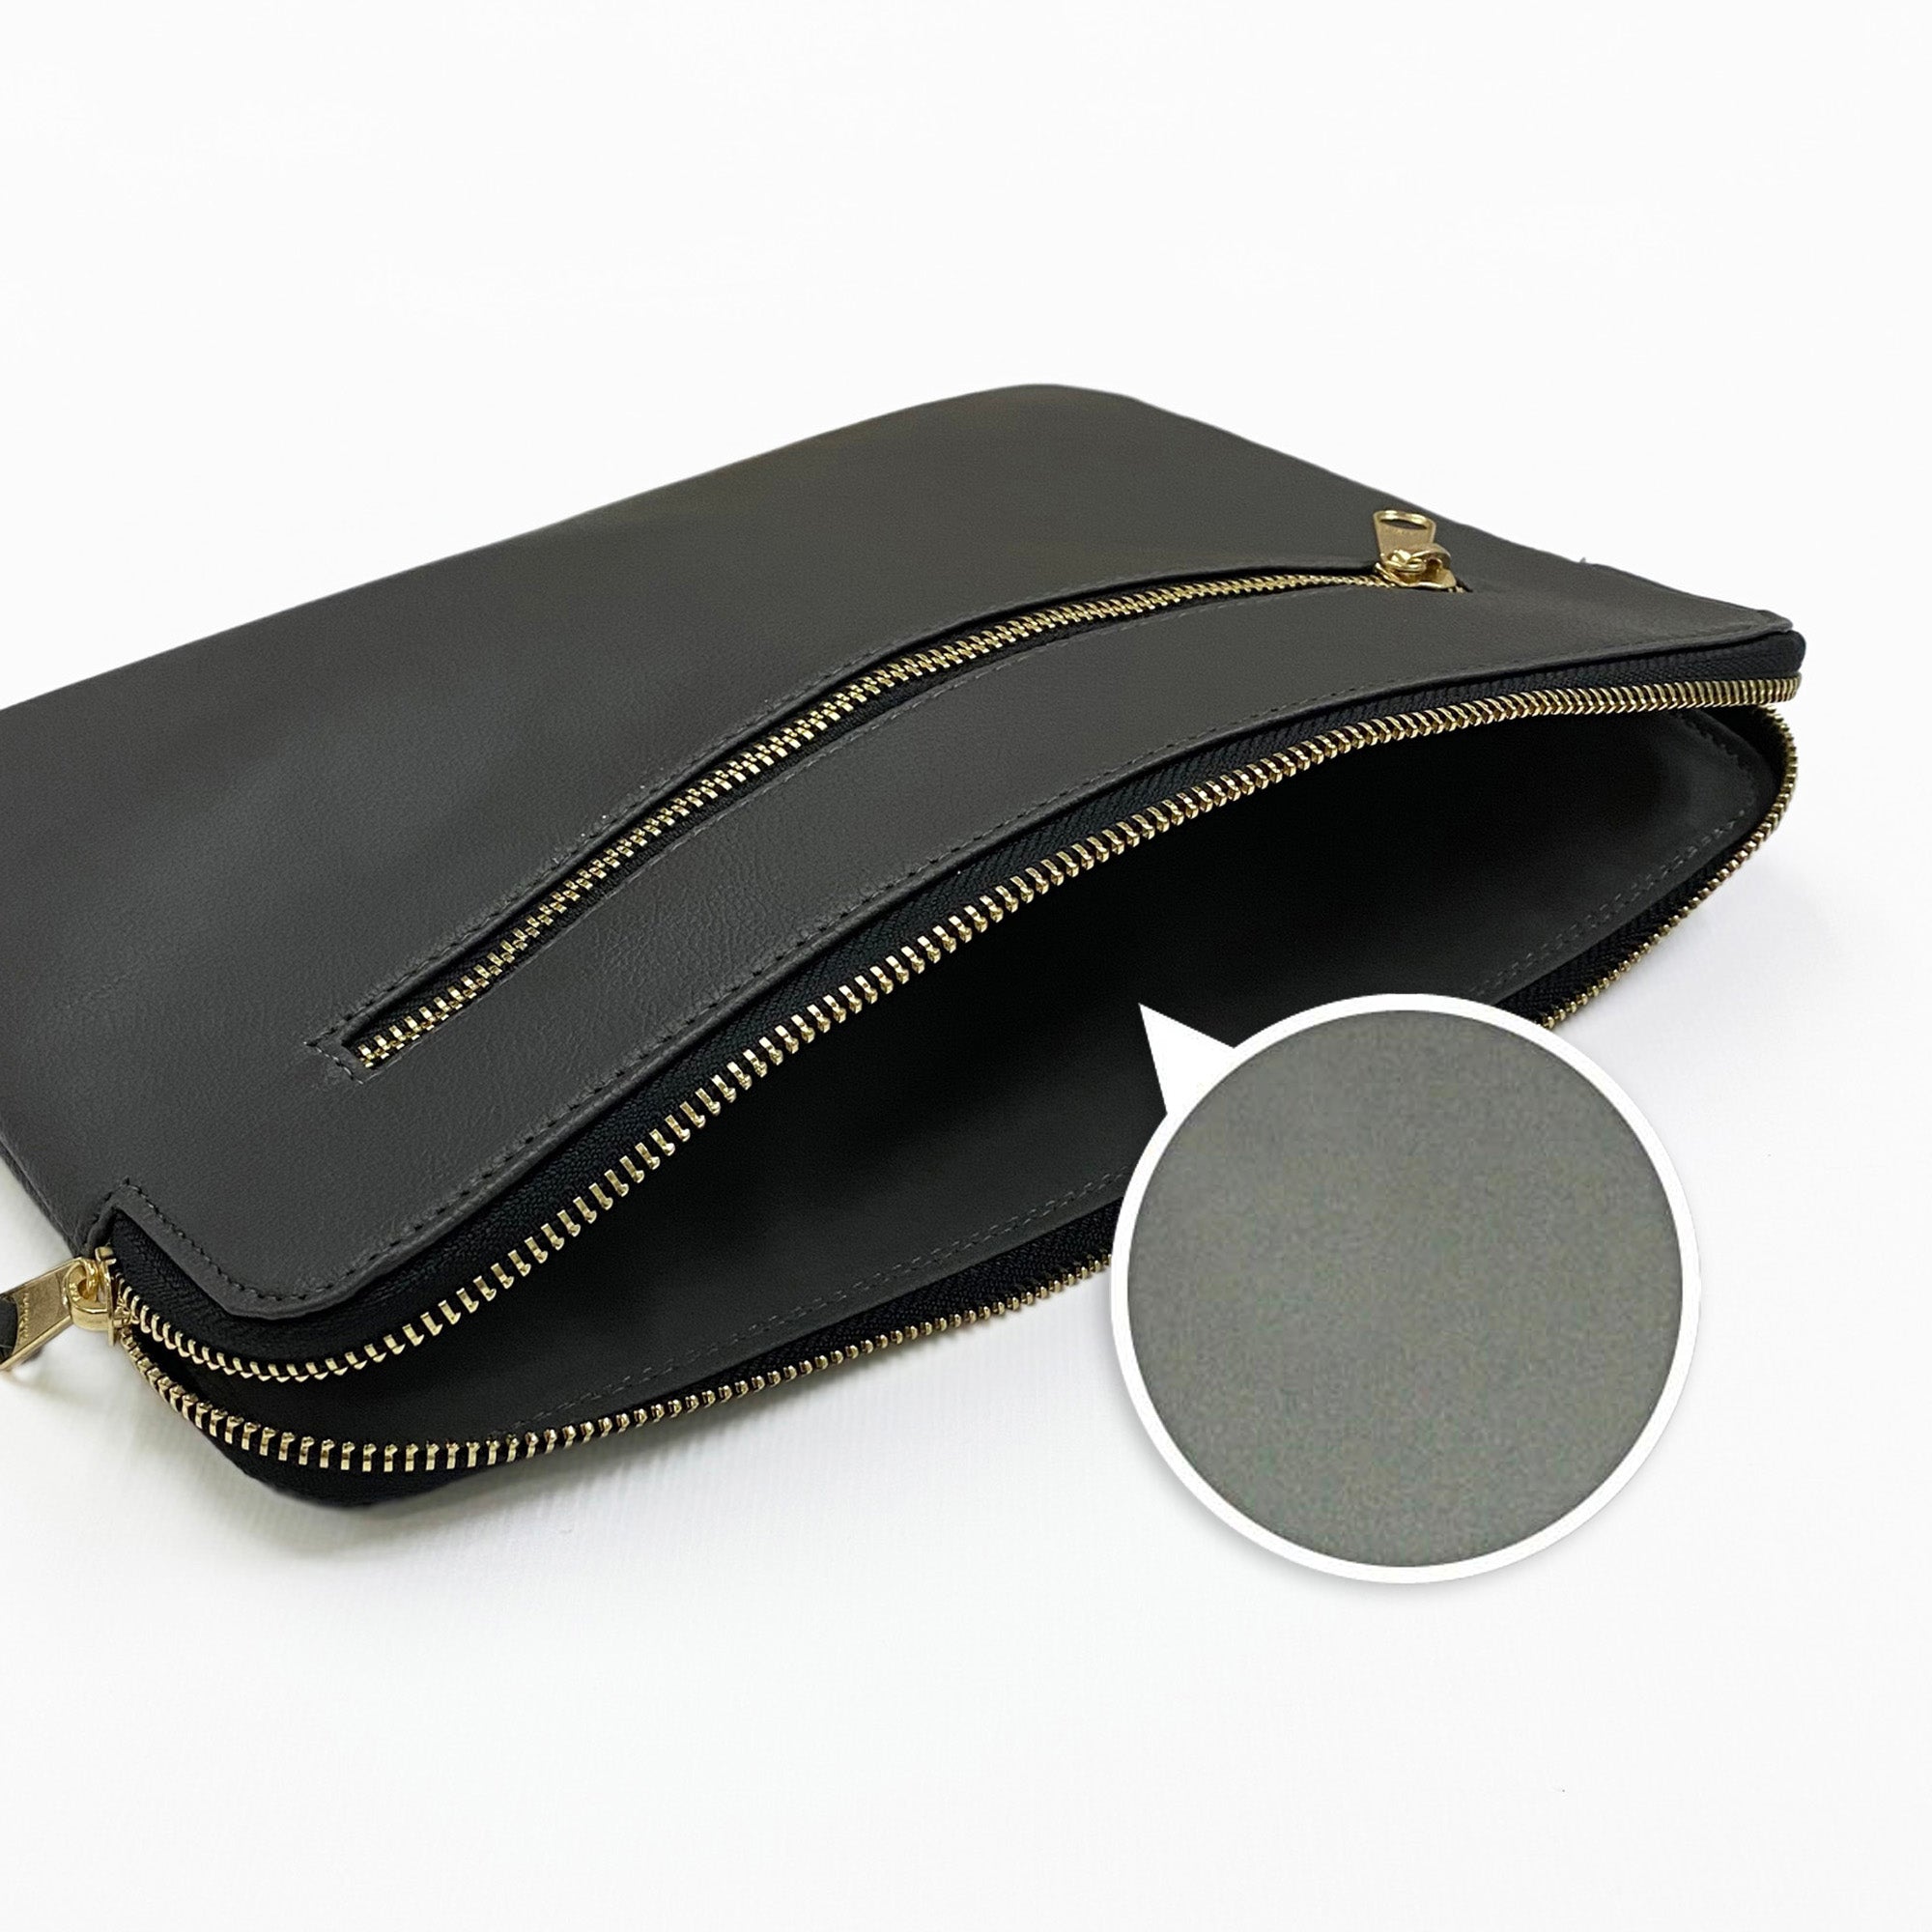 Black Tablet sleeve with zipper closure and Suede inside